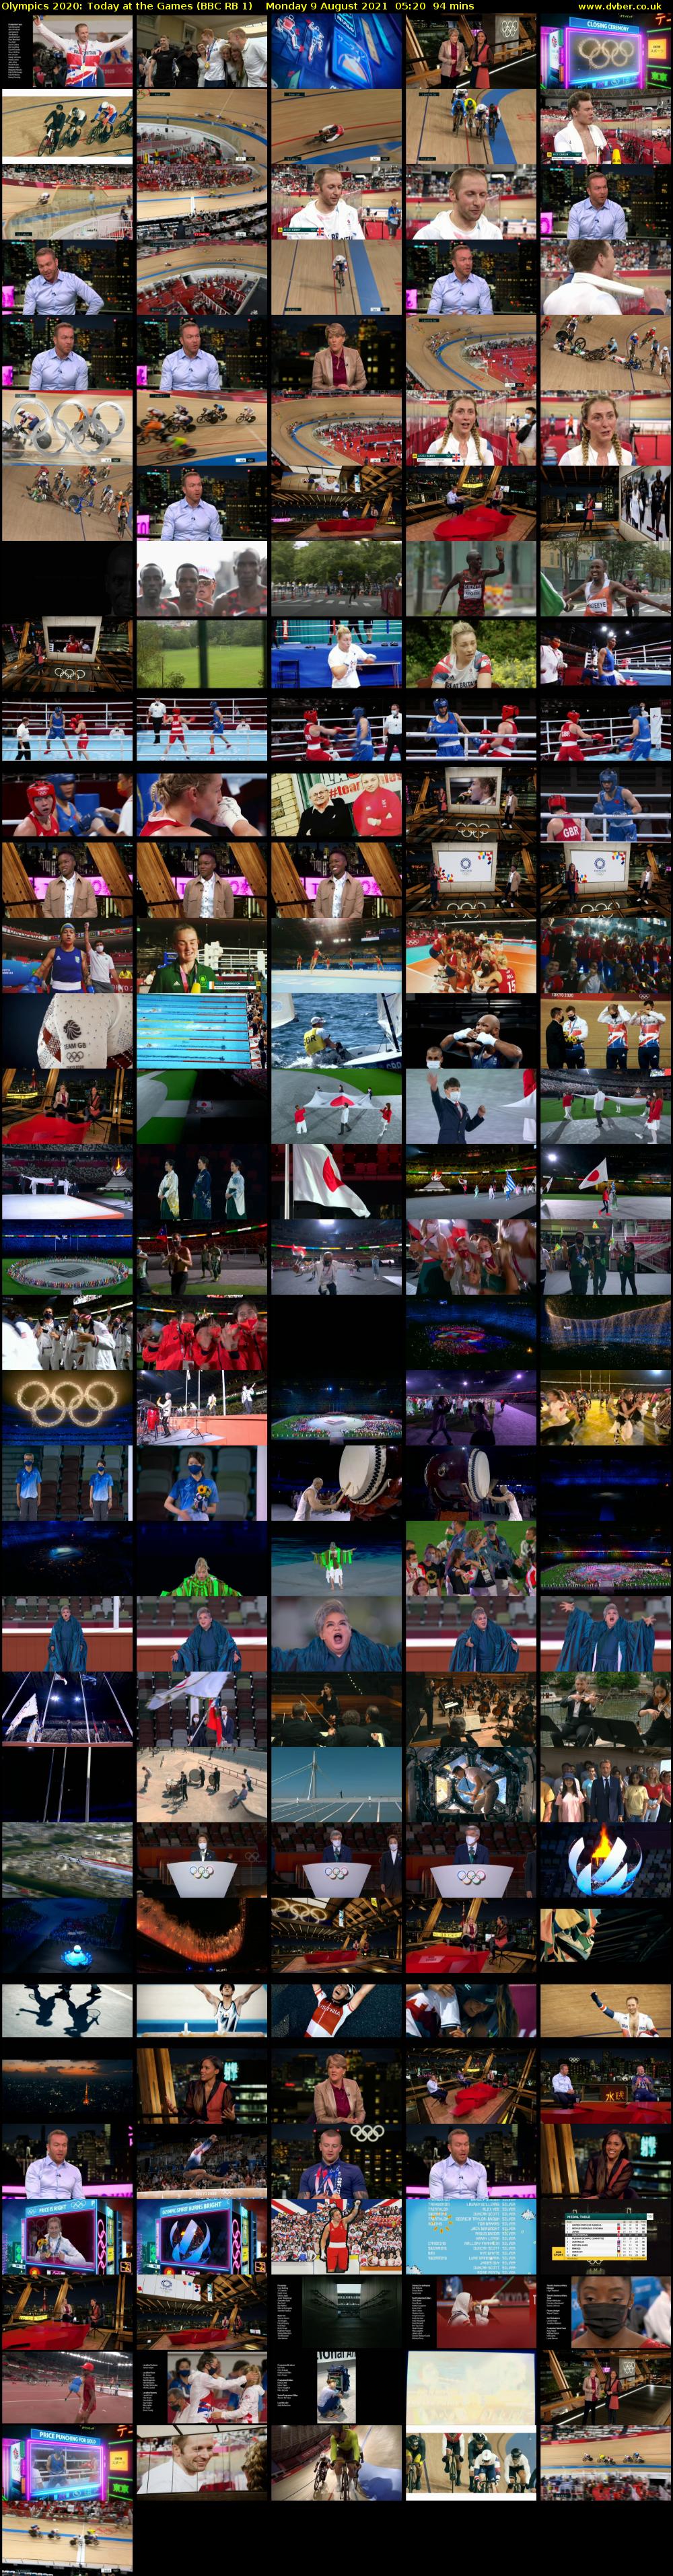 Olympics 2020: Today at the Games (BBC RB 1) Monday 9 August 2021 05:20 - 06:54